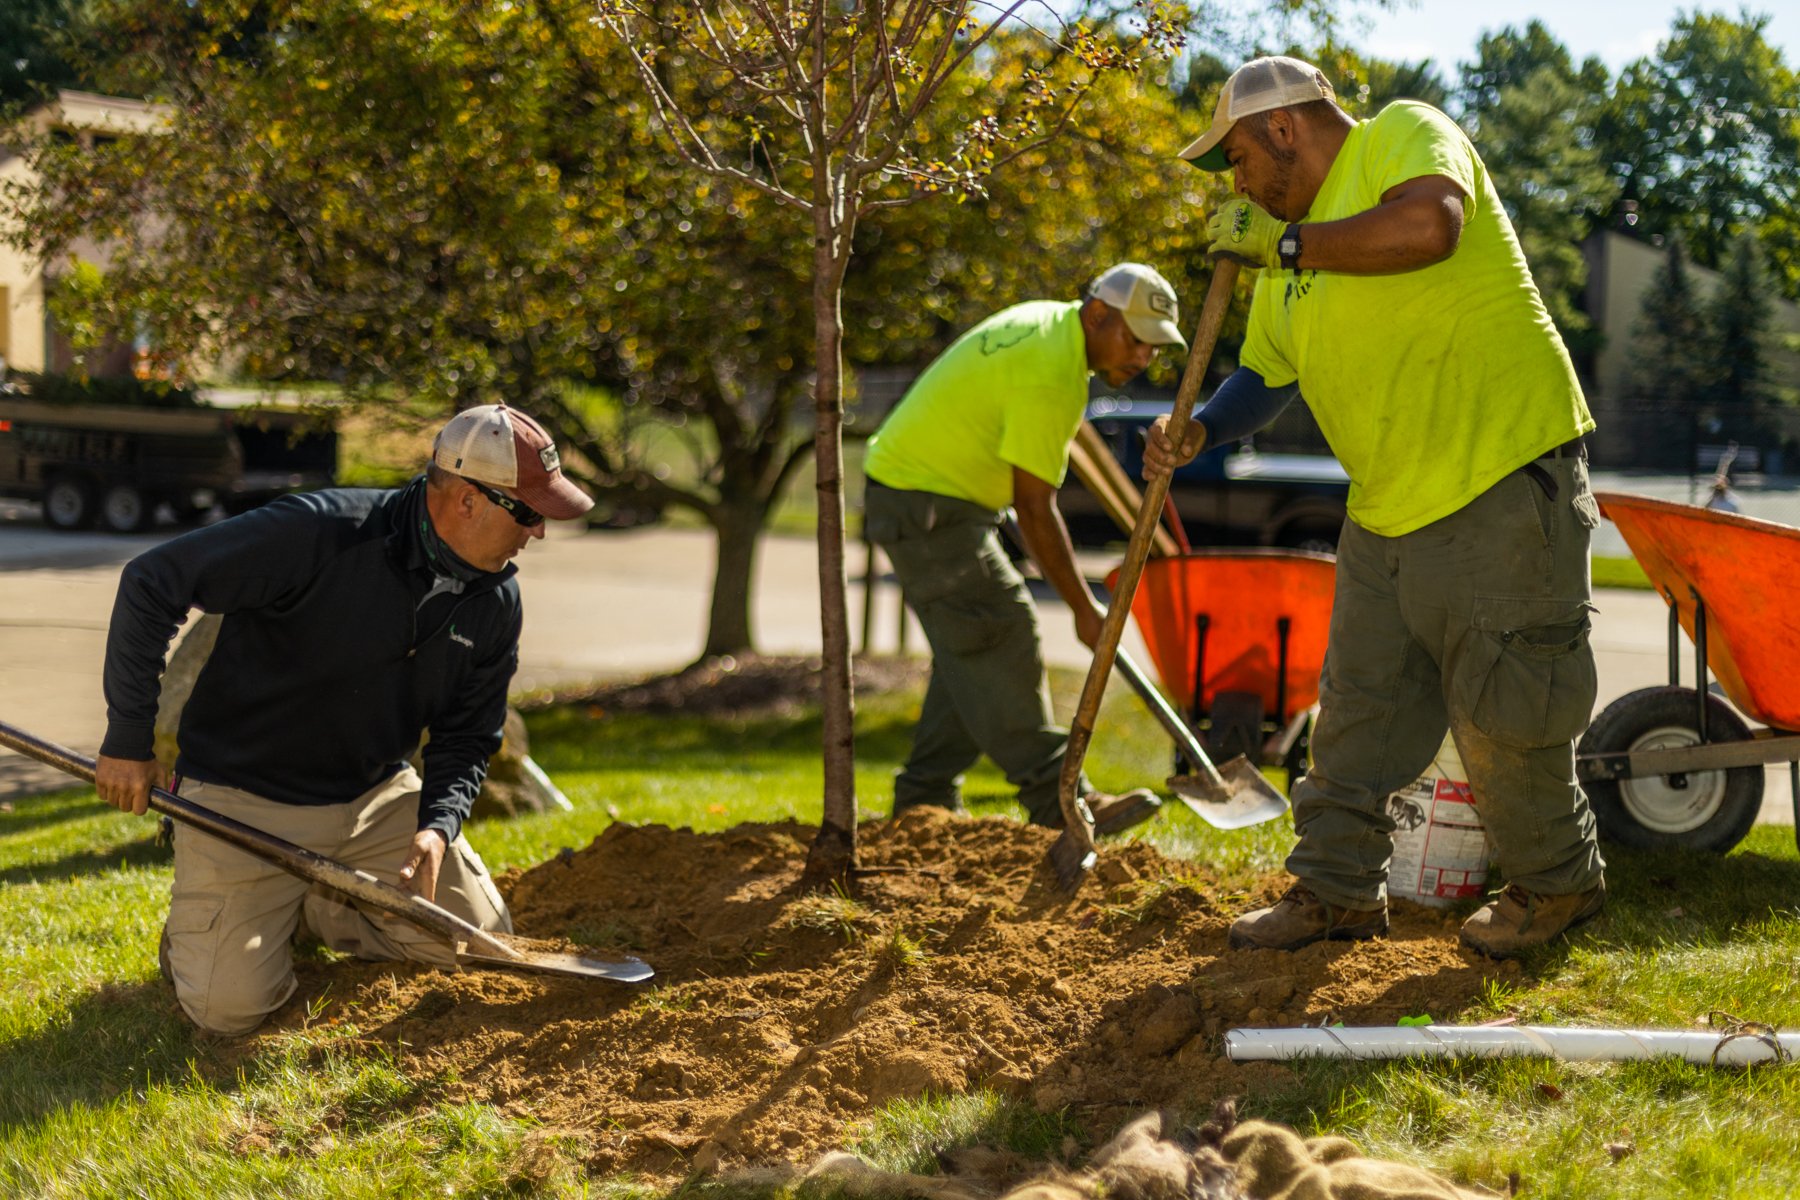 Crew planting tree with shovels